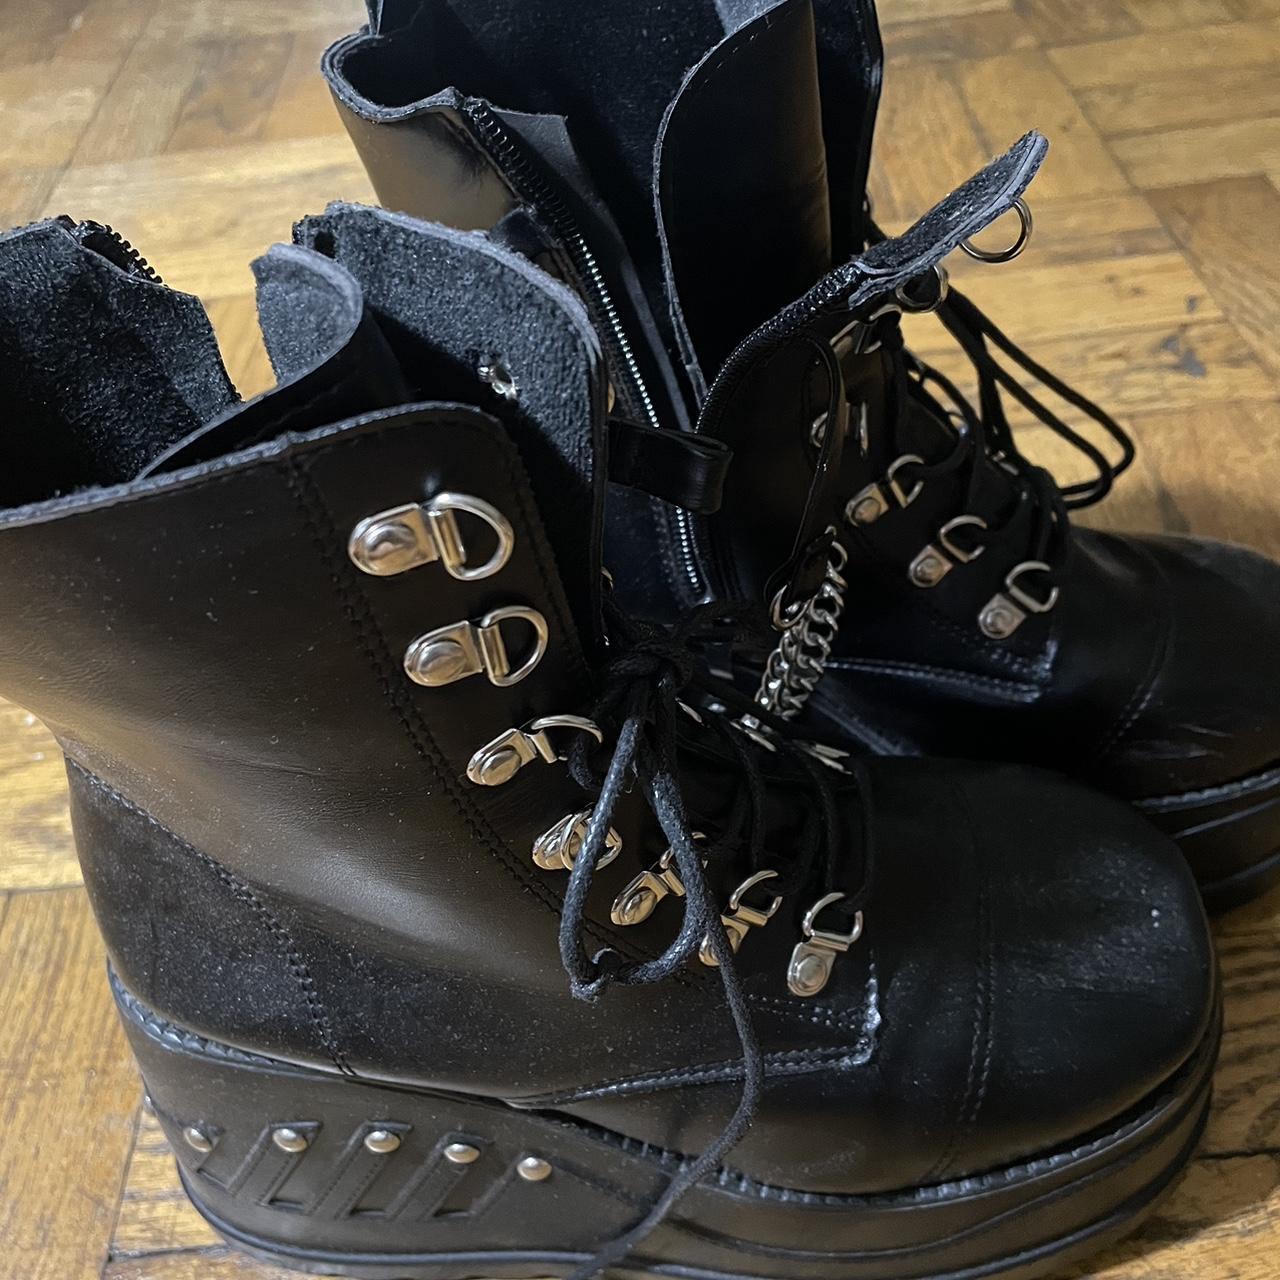 Size 7 women’s boot Missing one chain - Depop